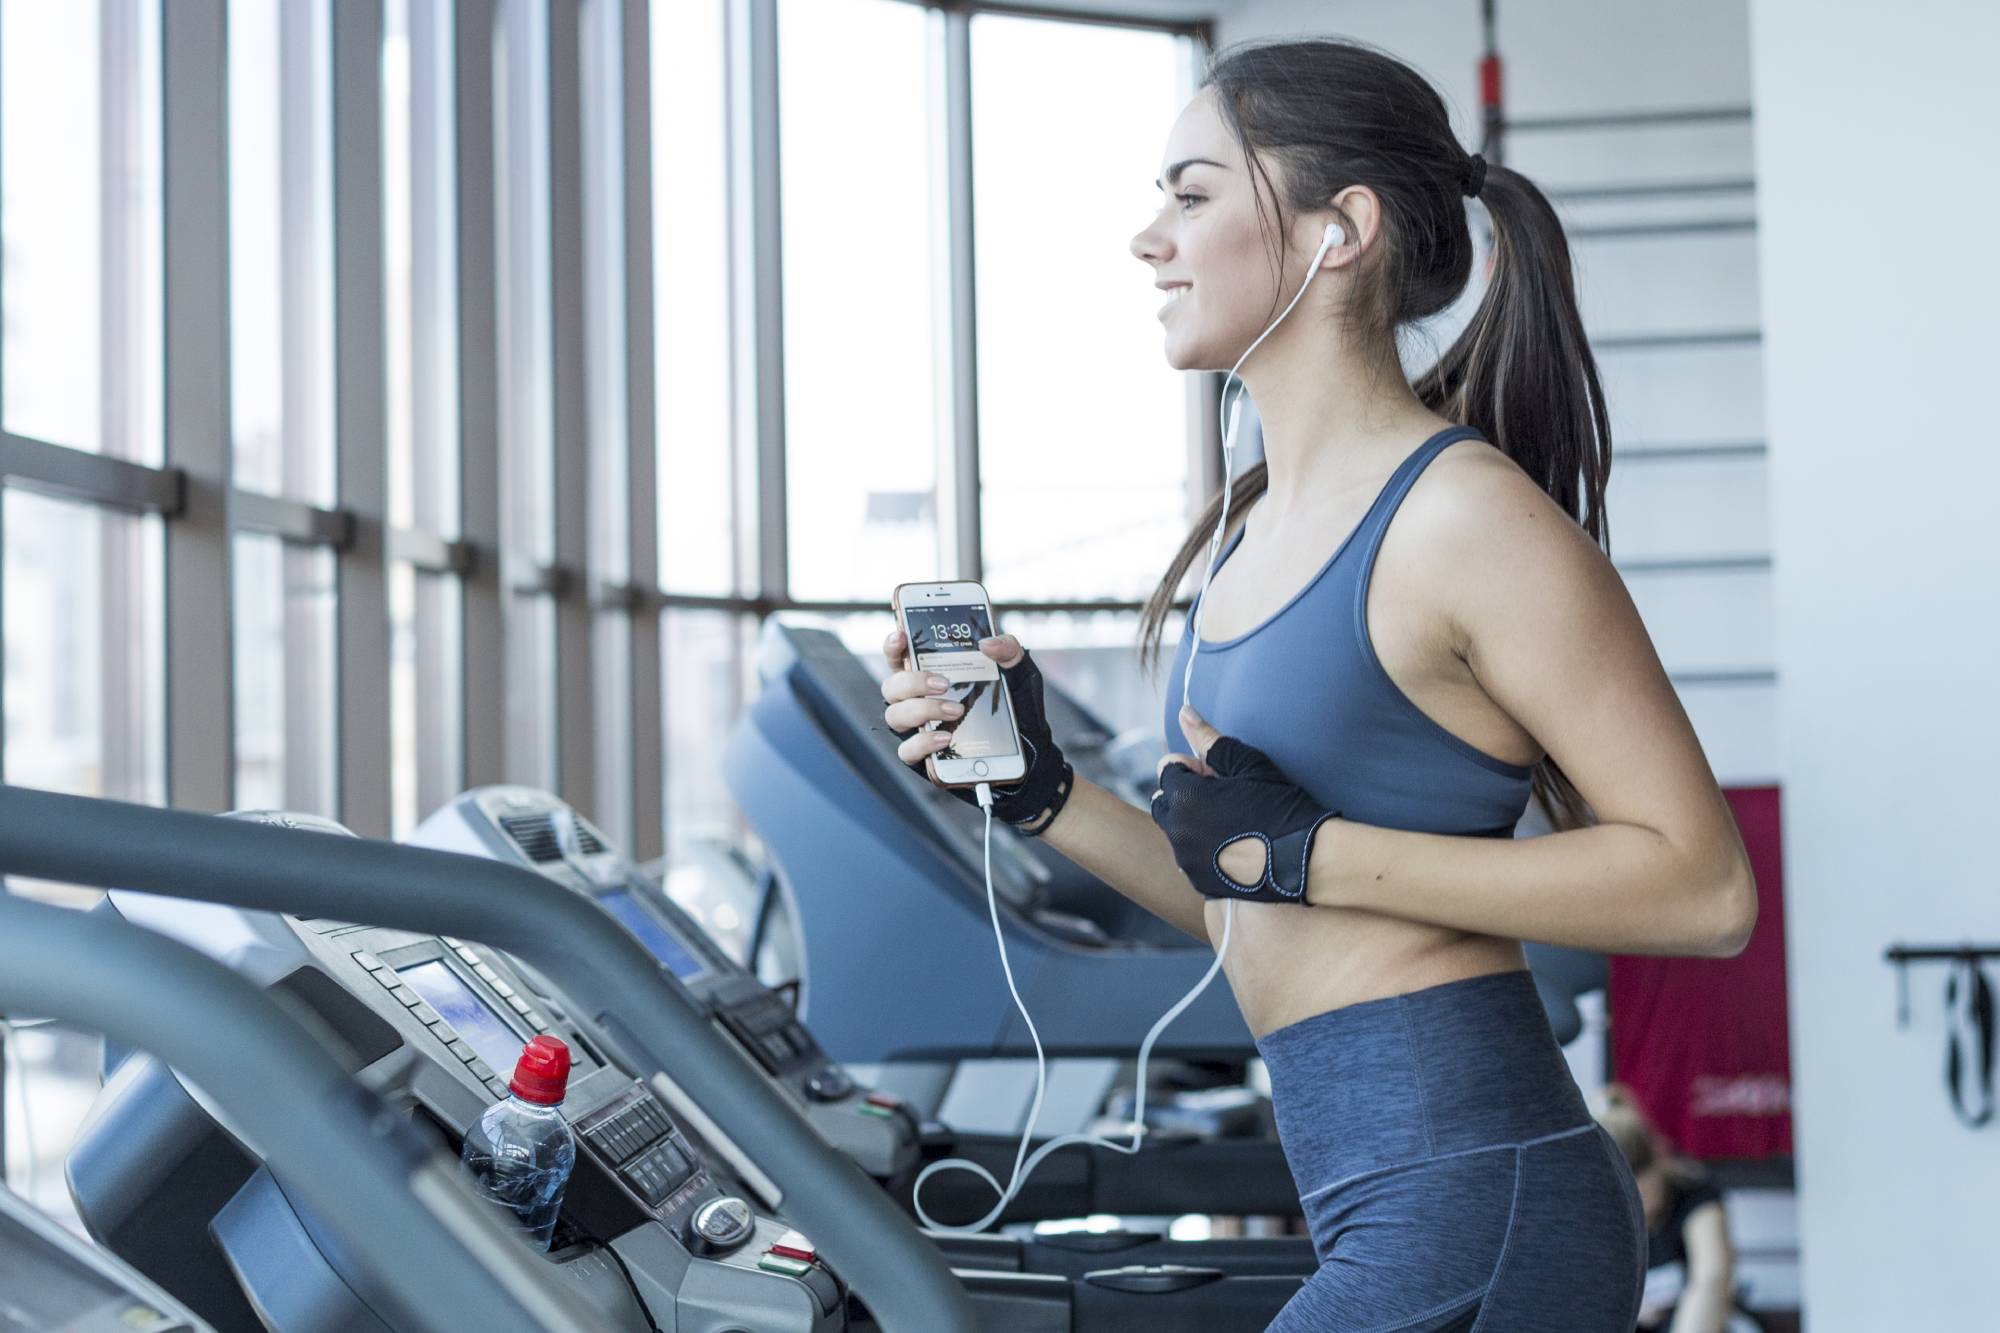 8 tiny secrets how to motivate yourself to go to the gym regularly